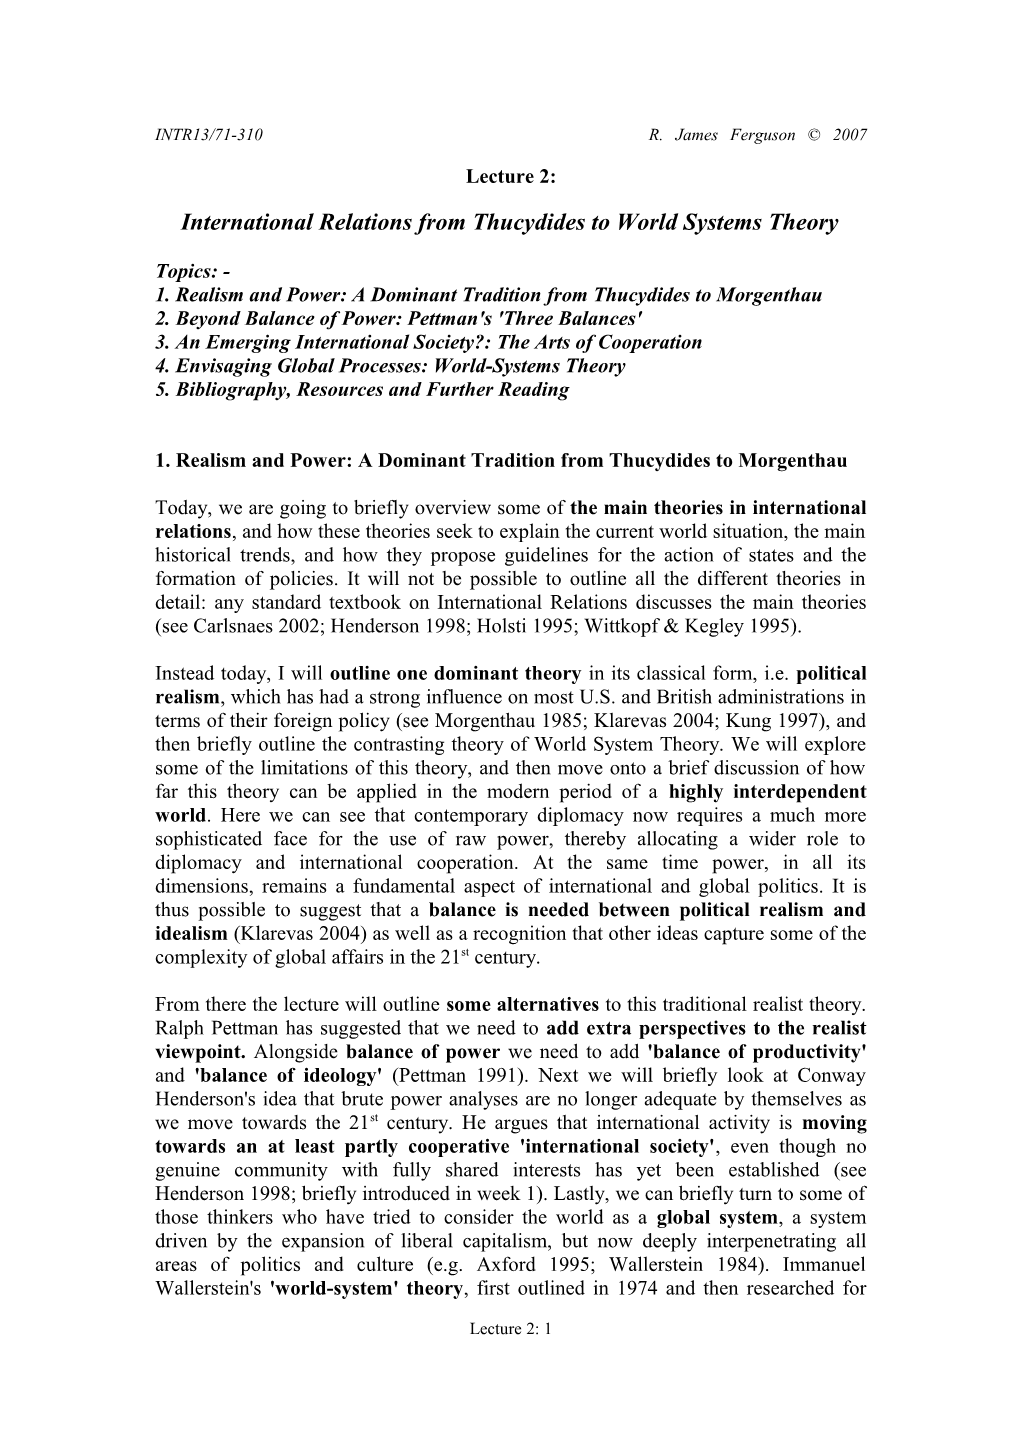 International Relations from Thucydides to World Systems Theory